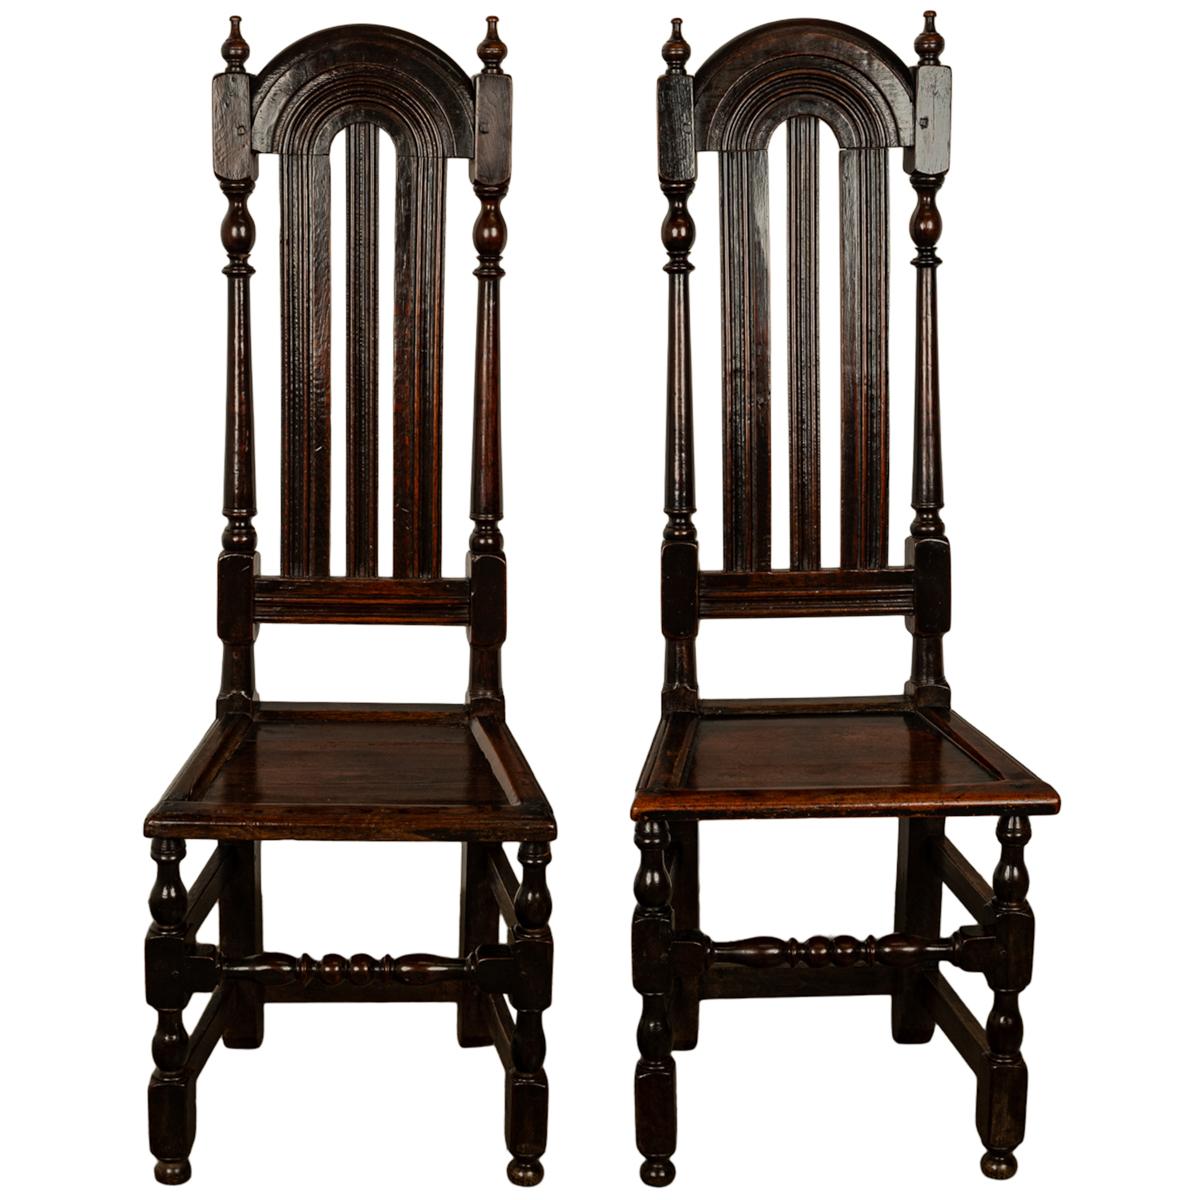 A true pair of late 17th century William & Mary period oak joined back stools/side chairs, circa 1690.
A rare pair of original late 1600's chairs from the joint reign of King William III (House of Tudor) & Queen Mary II (House of Stuart). The chairs